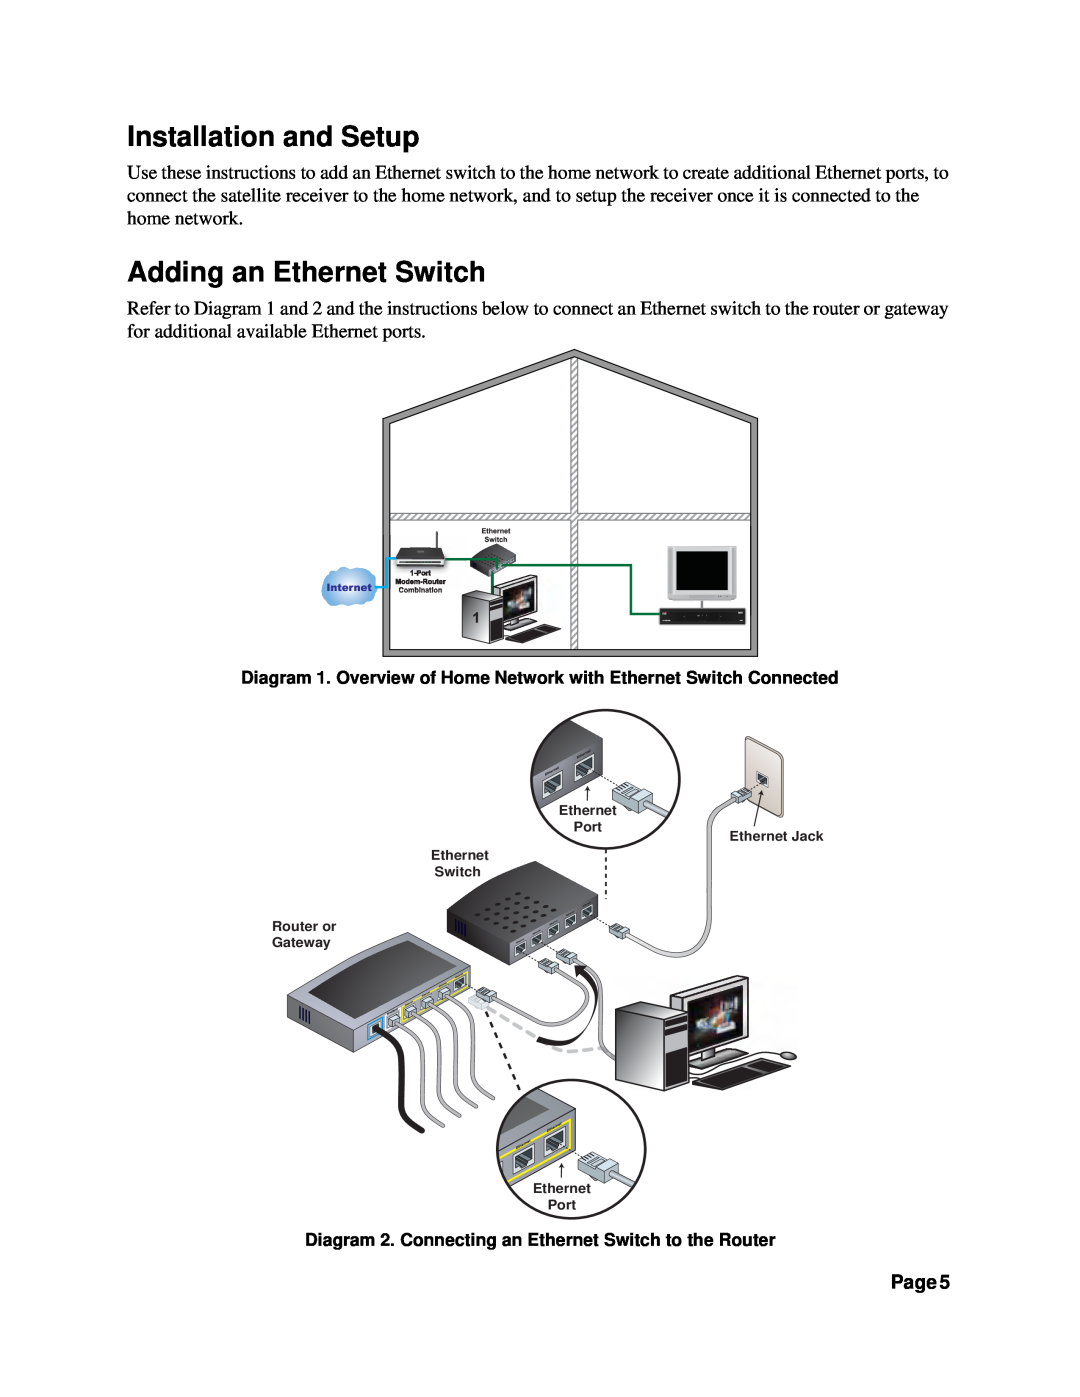 Dish Network HOME NETWORK manual Installation and Setup, Adding an Ethernet Switch, Page 